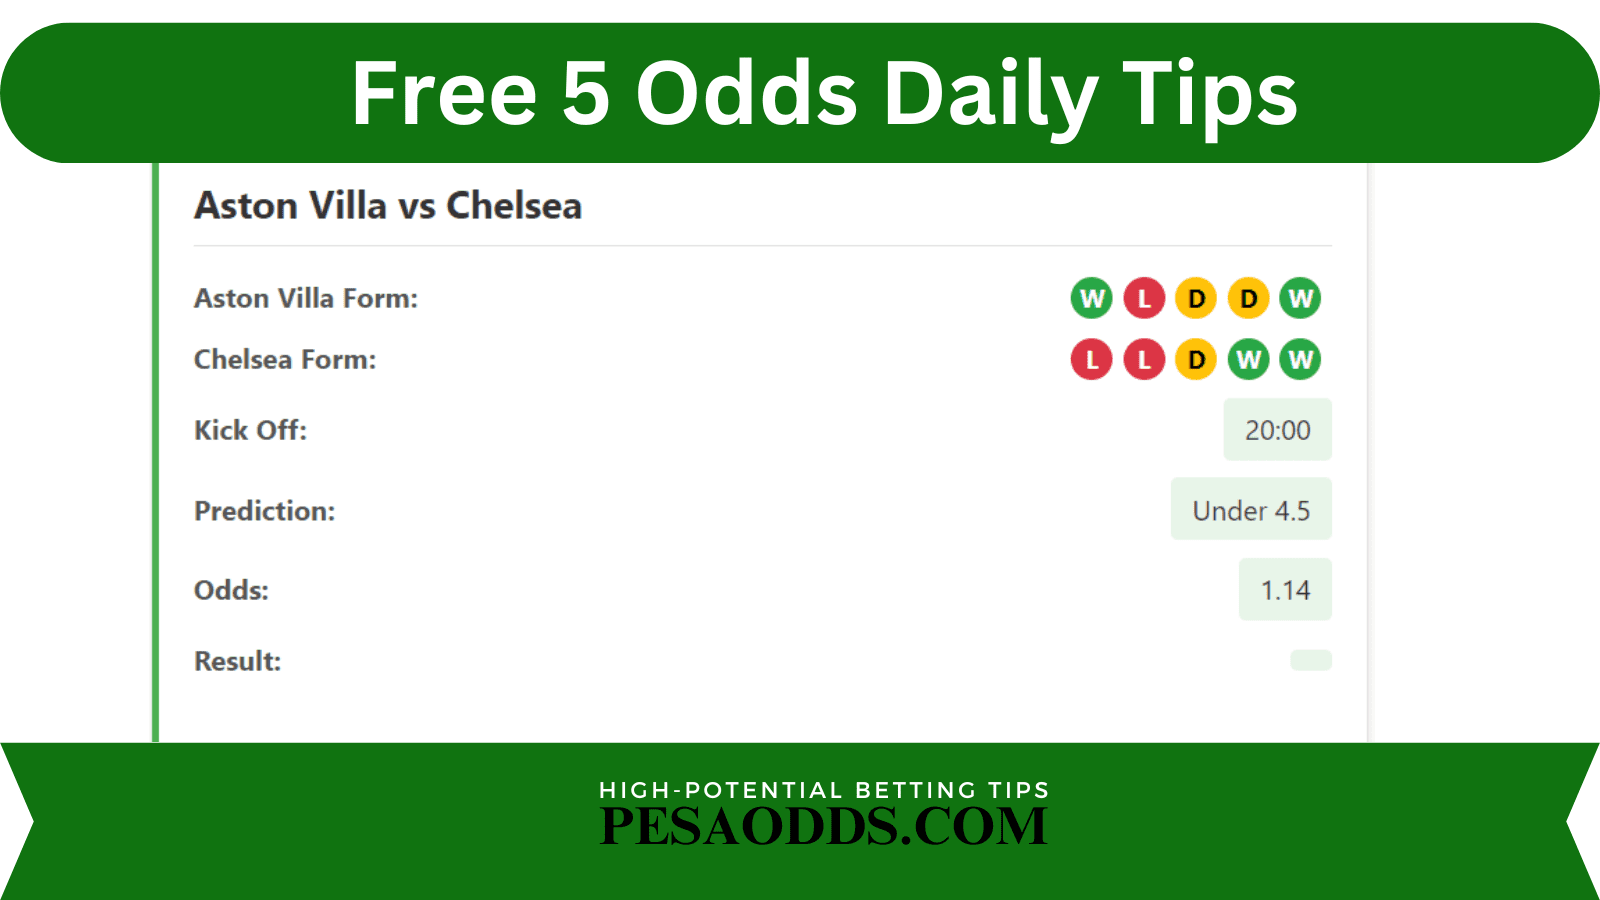 Free 5 Odds Daily Tips